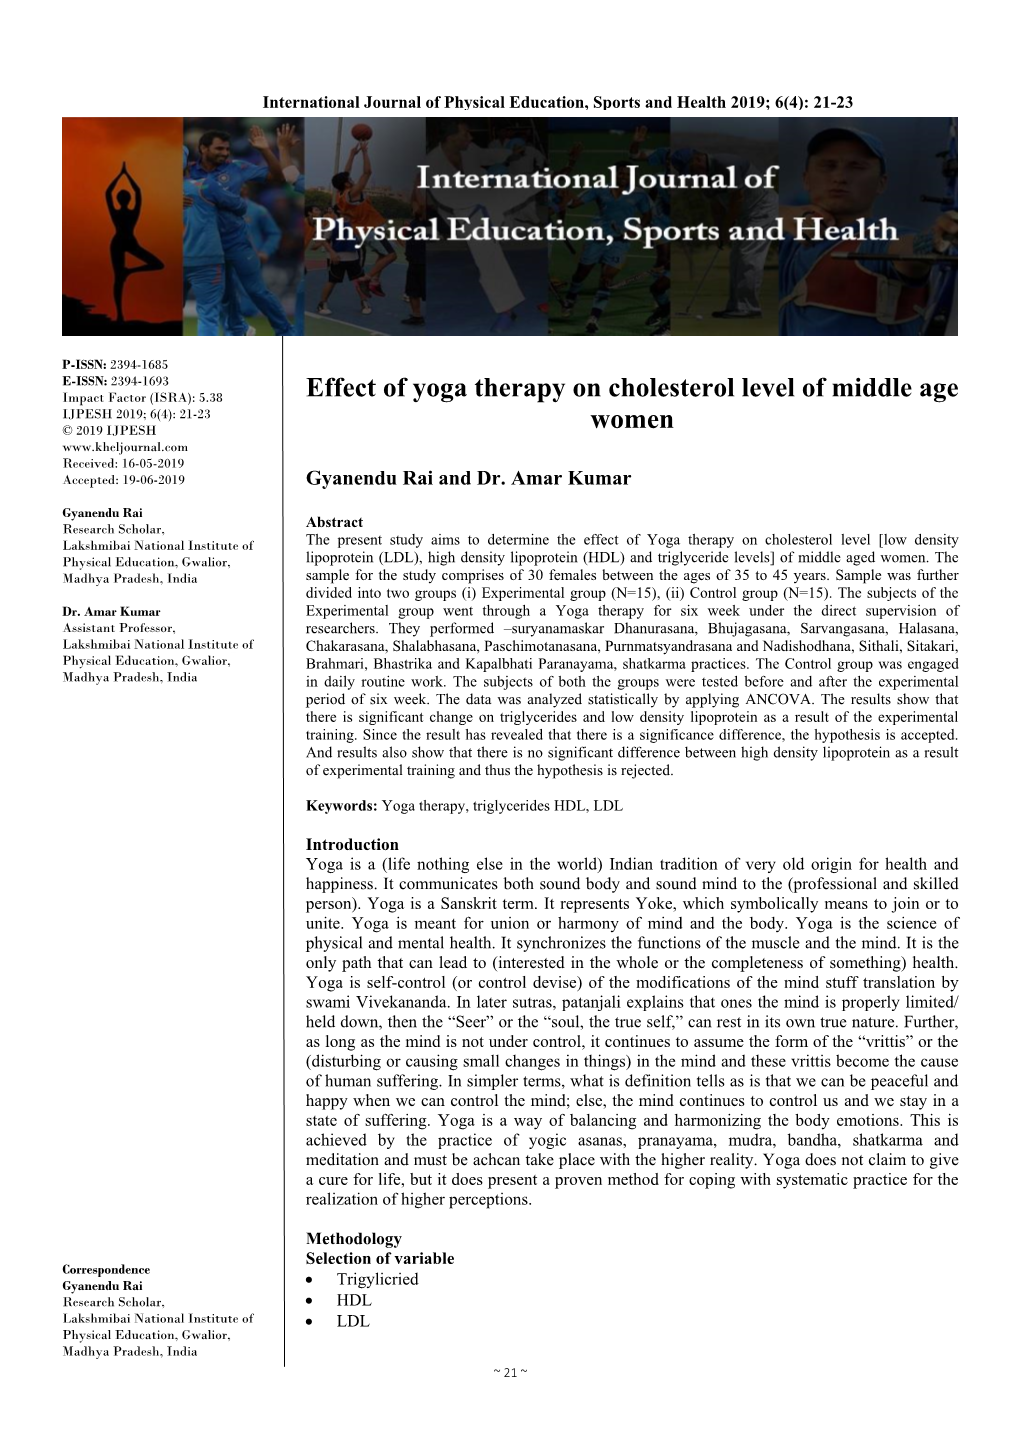 Effect of Yoga Therapy on Cholesterol Level of Middle Age Women